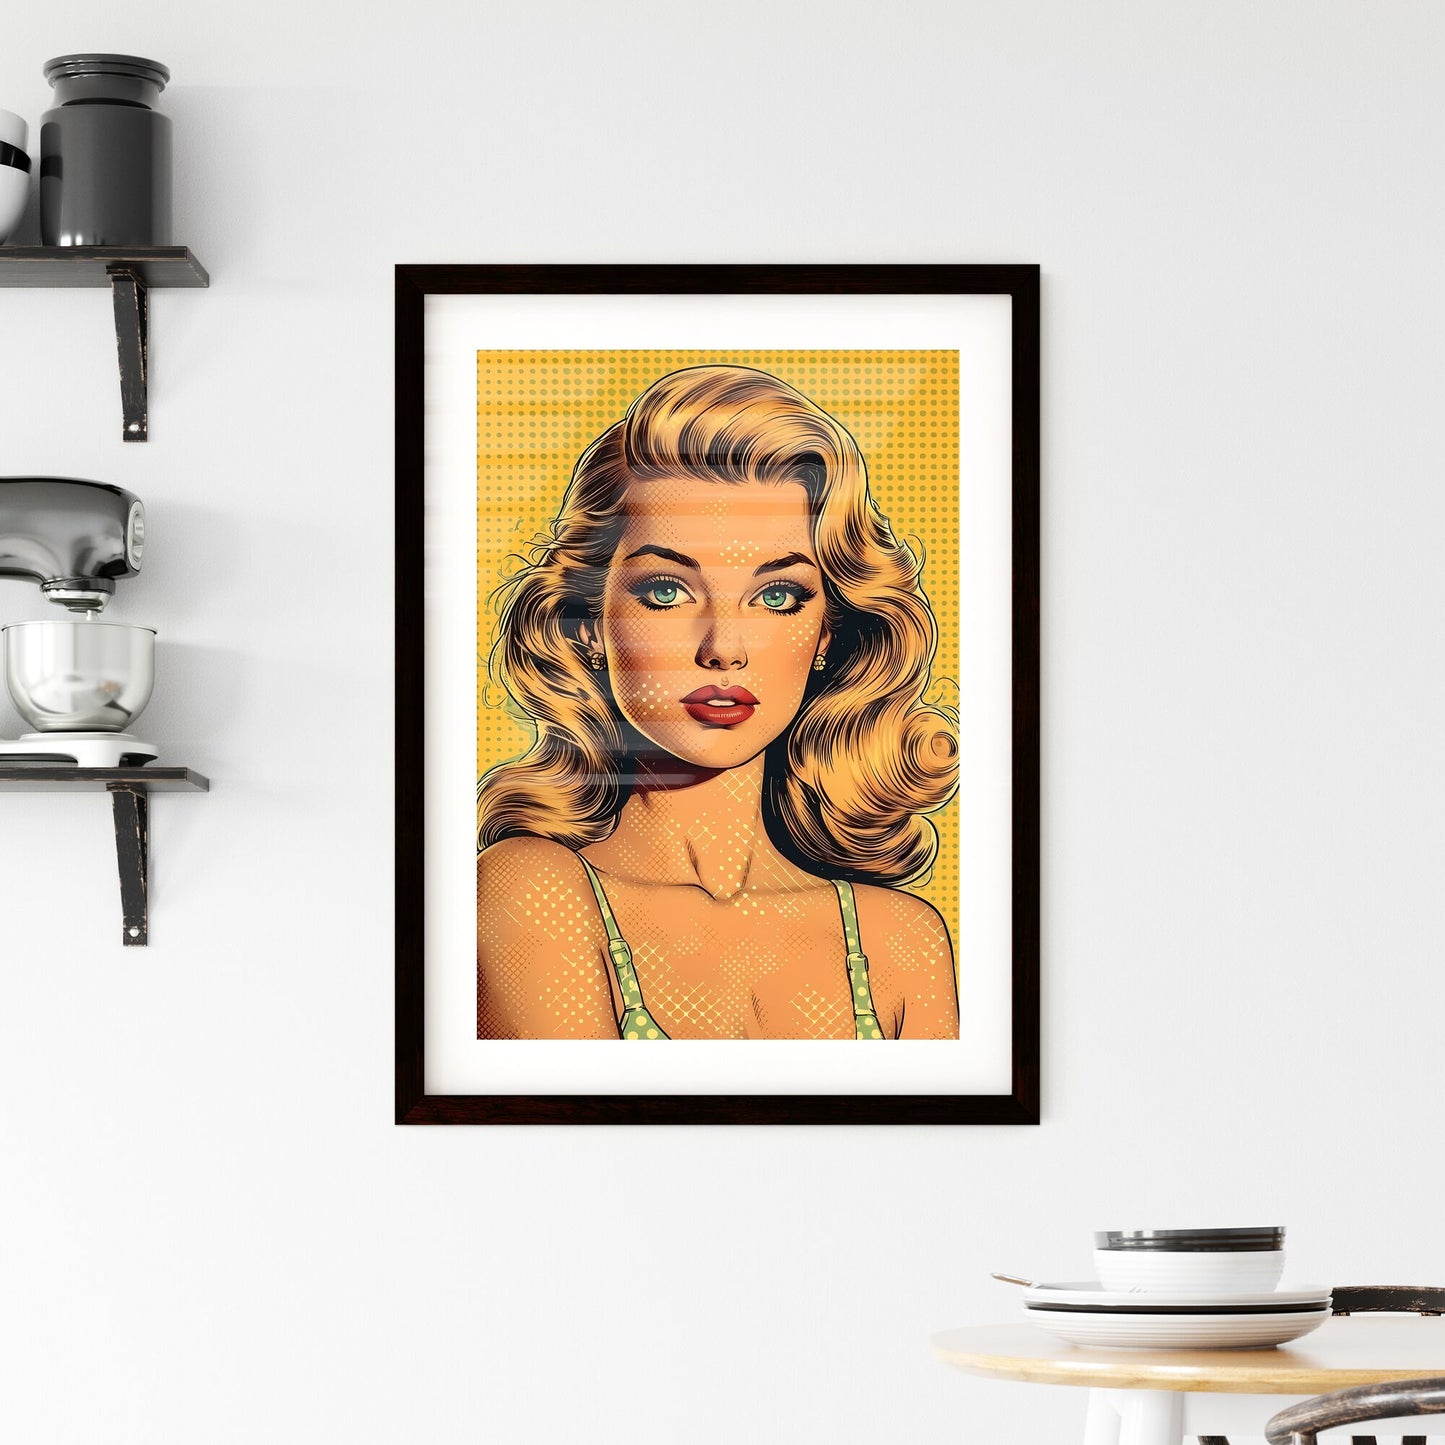 1959 pin up girl - Art print of a woman with long hair and green eyes Default Title